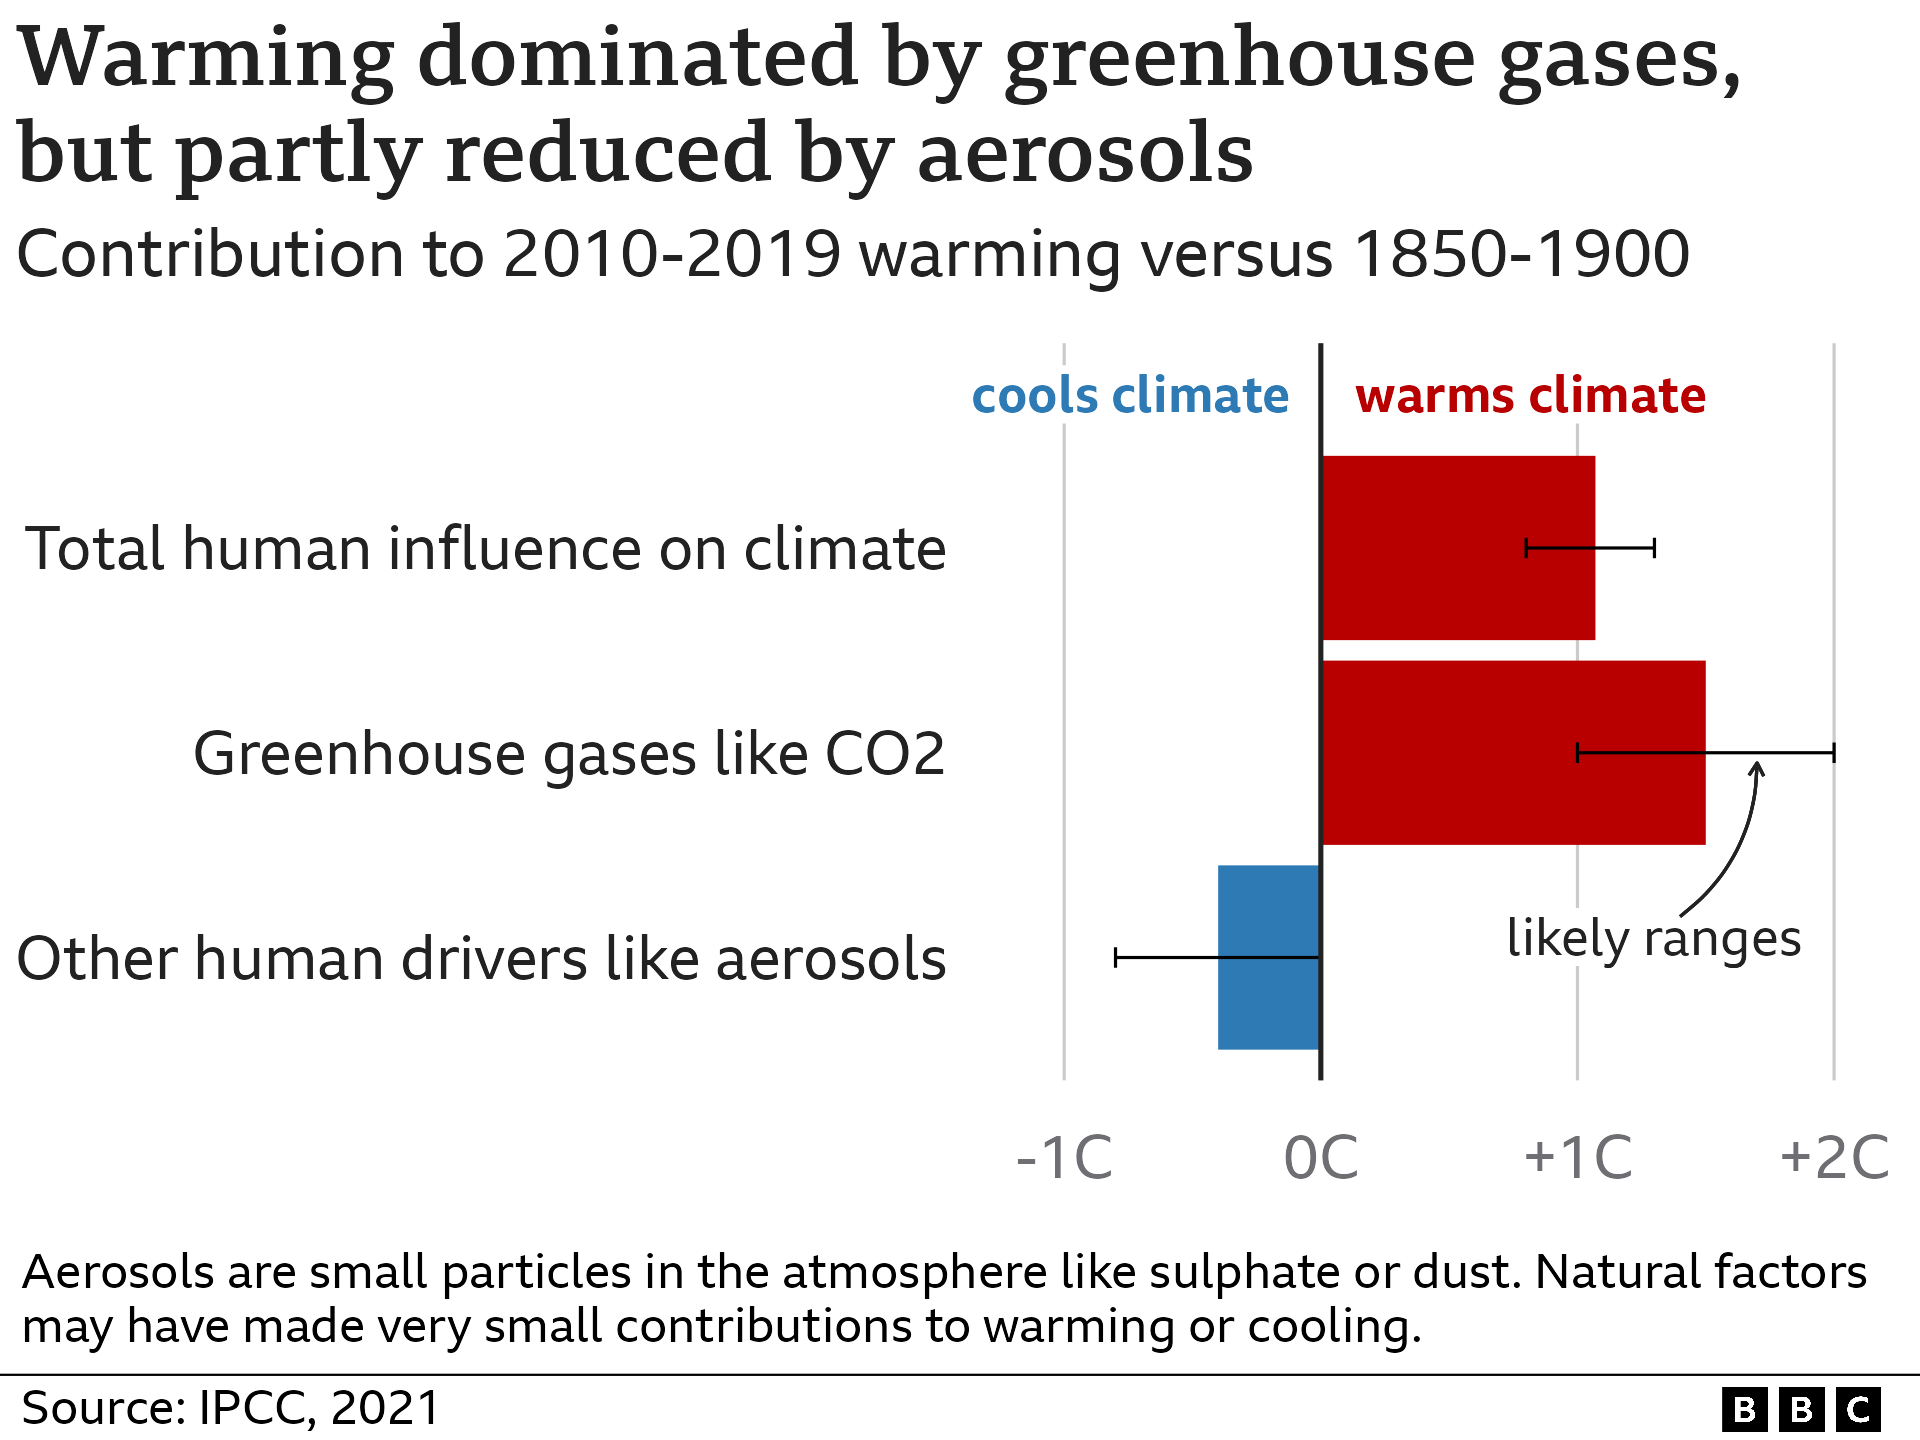 Contributions to 2010-2019 warming versus 1850-1900 levels is dominated by greenhouse gases (about +1.5C), and partly offset by other human drivers like aerosols (about -0.4C), giving an overall warming of about 1.1C. Natural variability is much less significant.